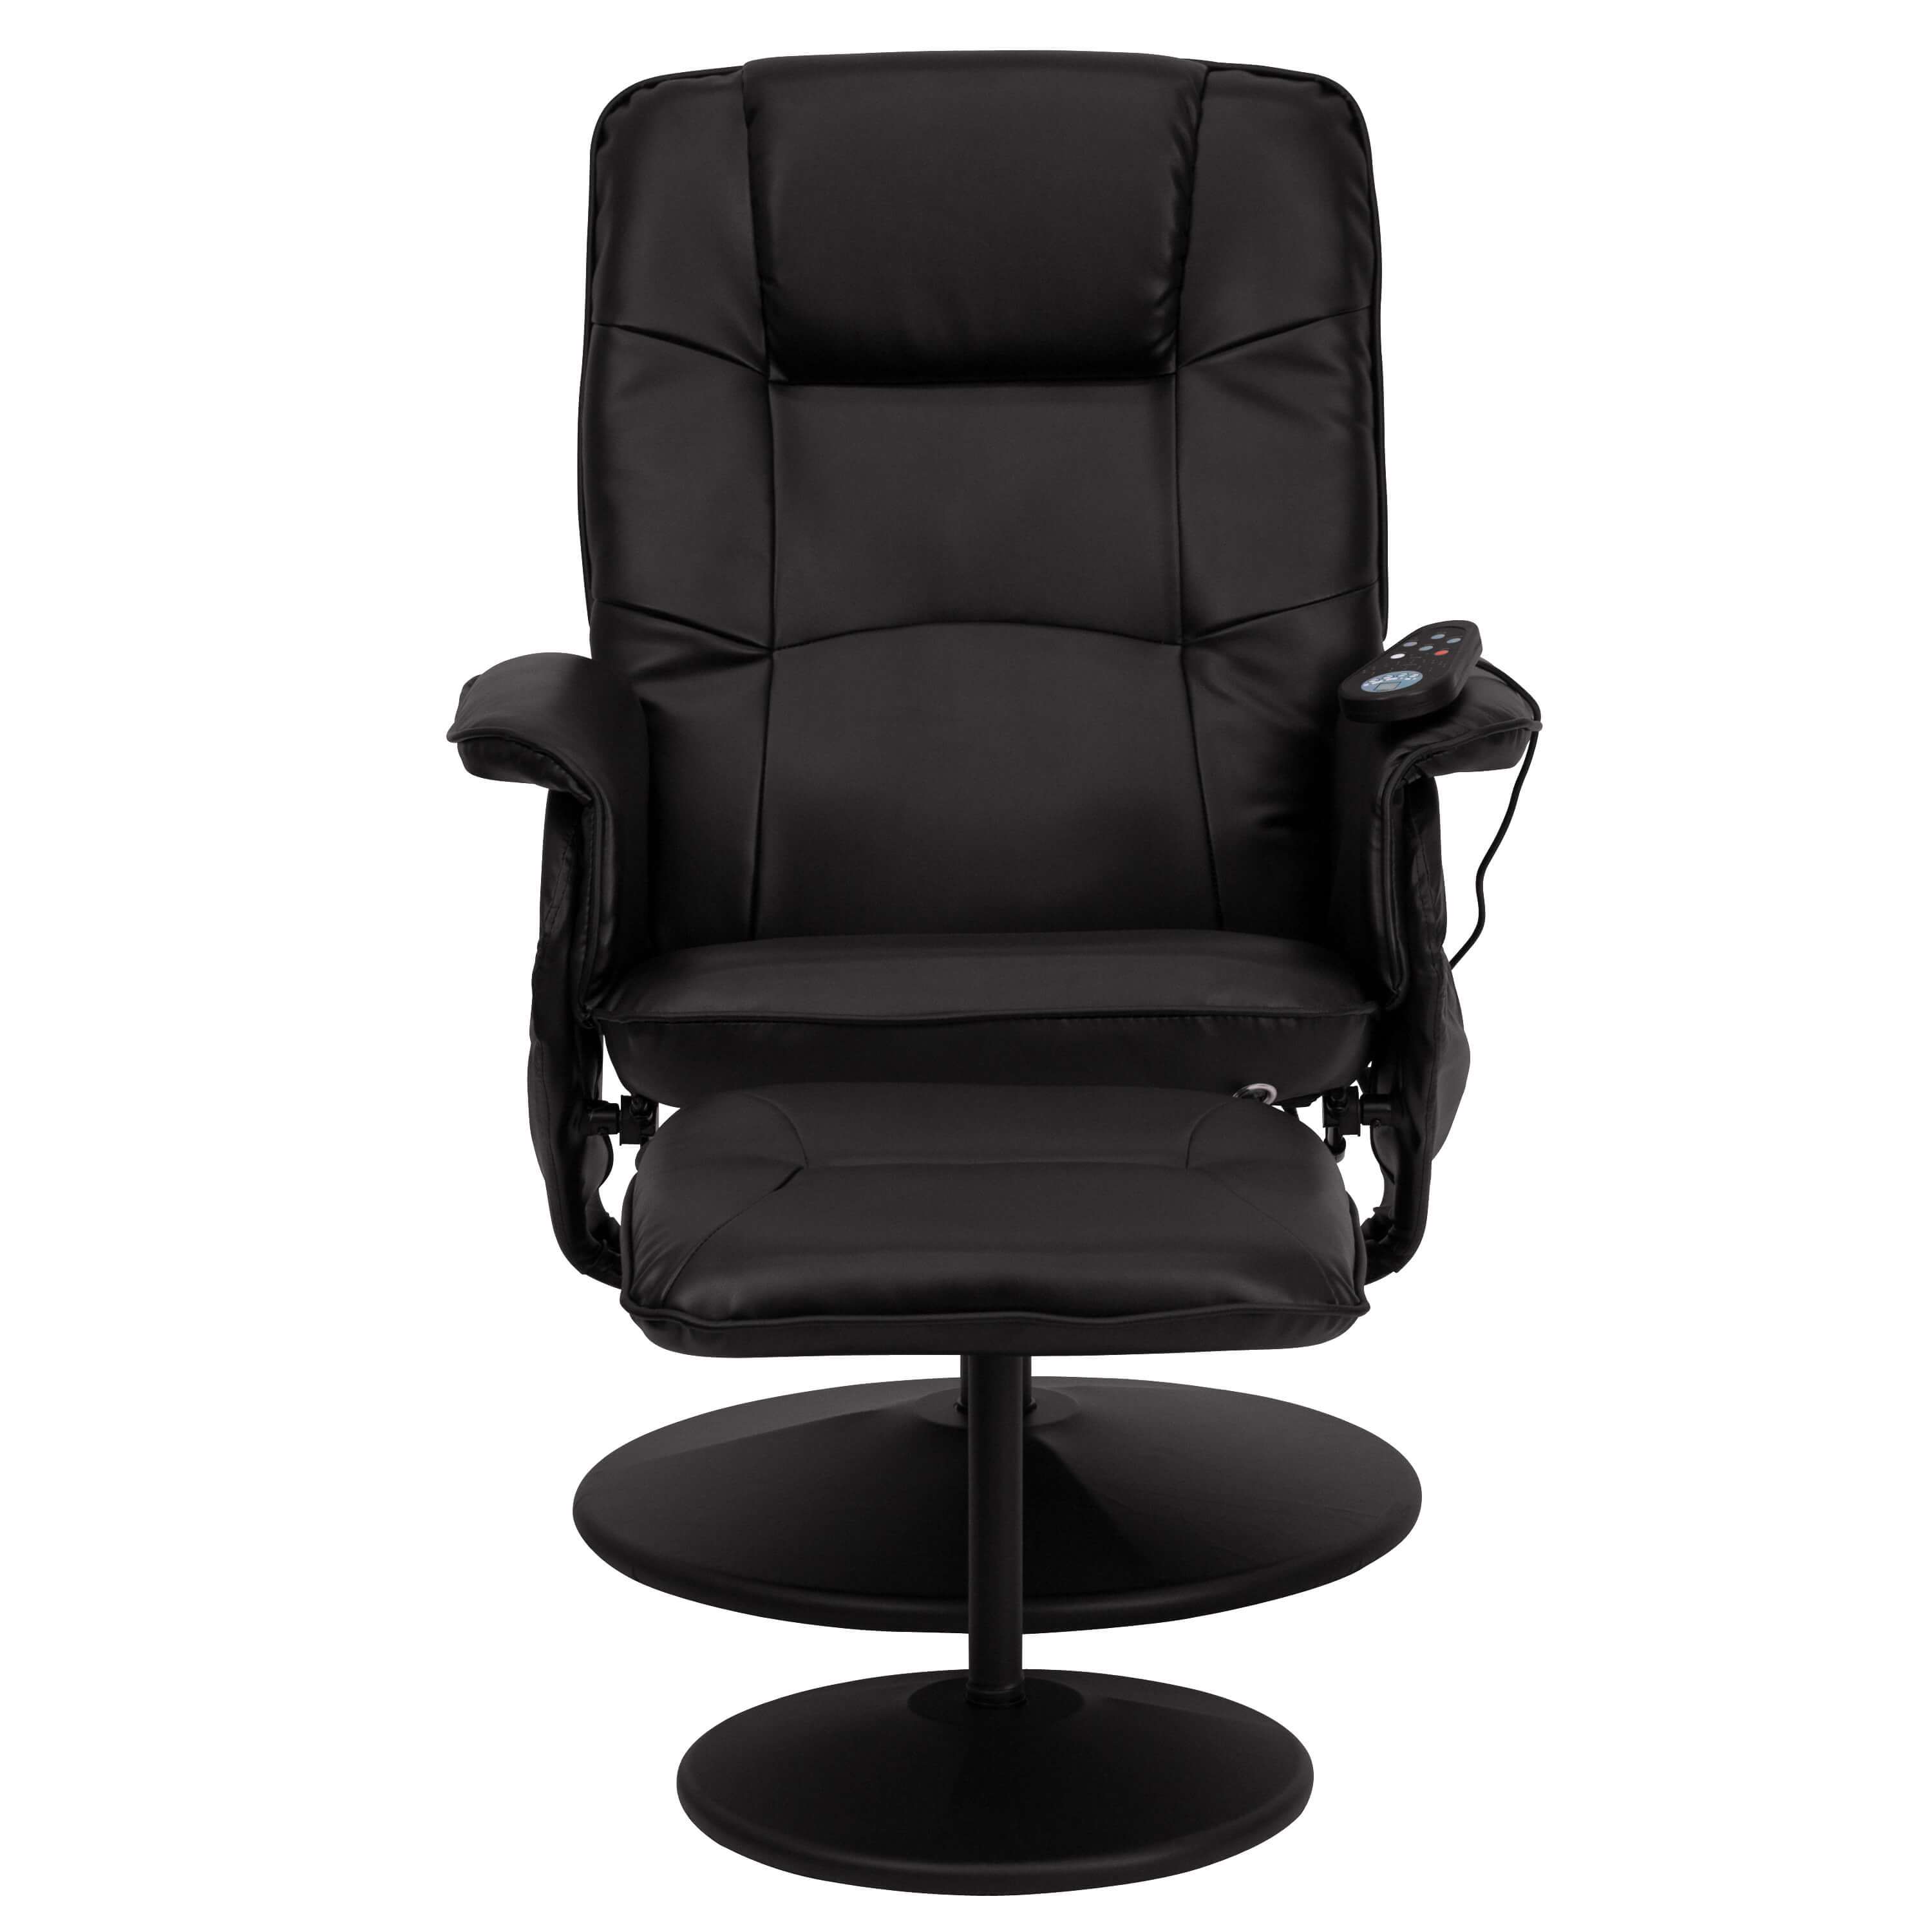 Recliner chair with massage front view